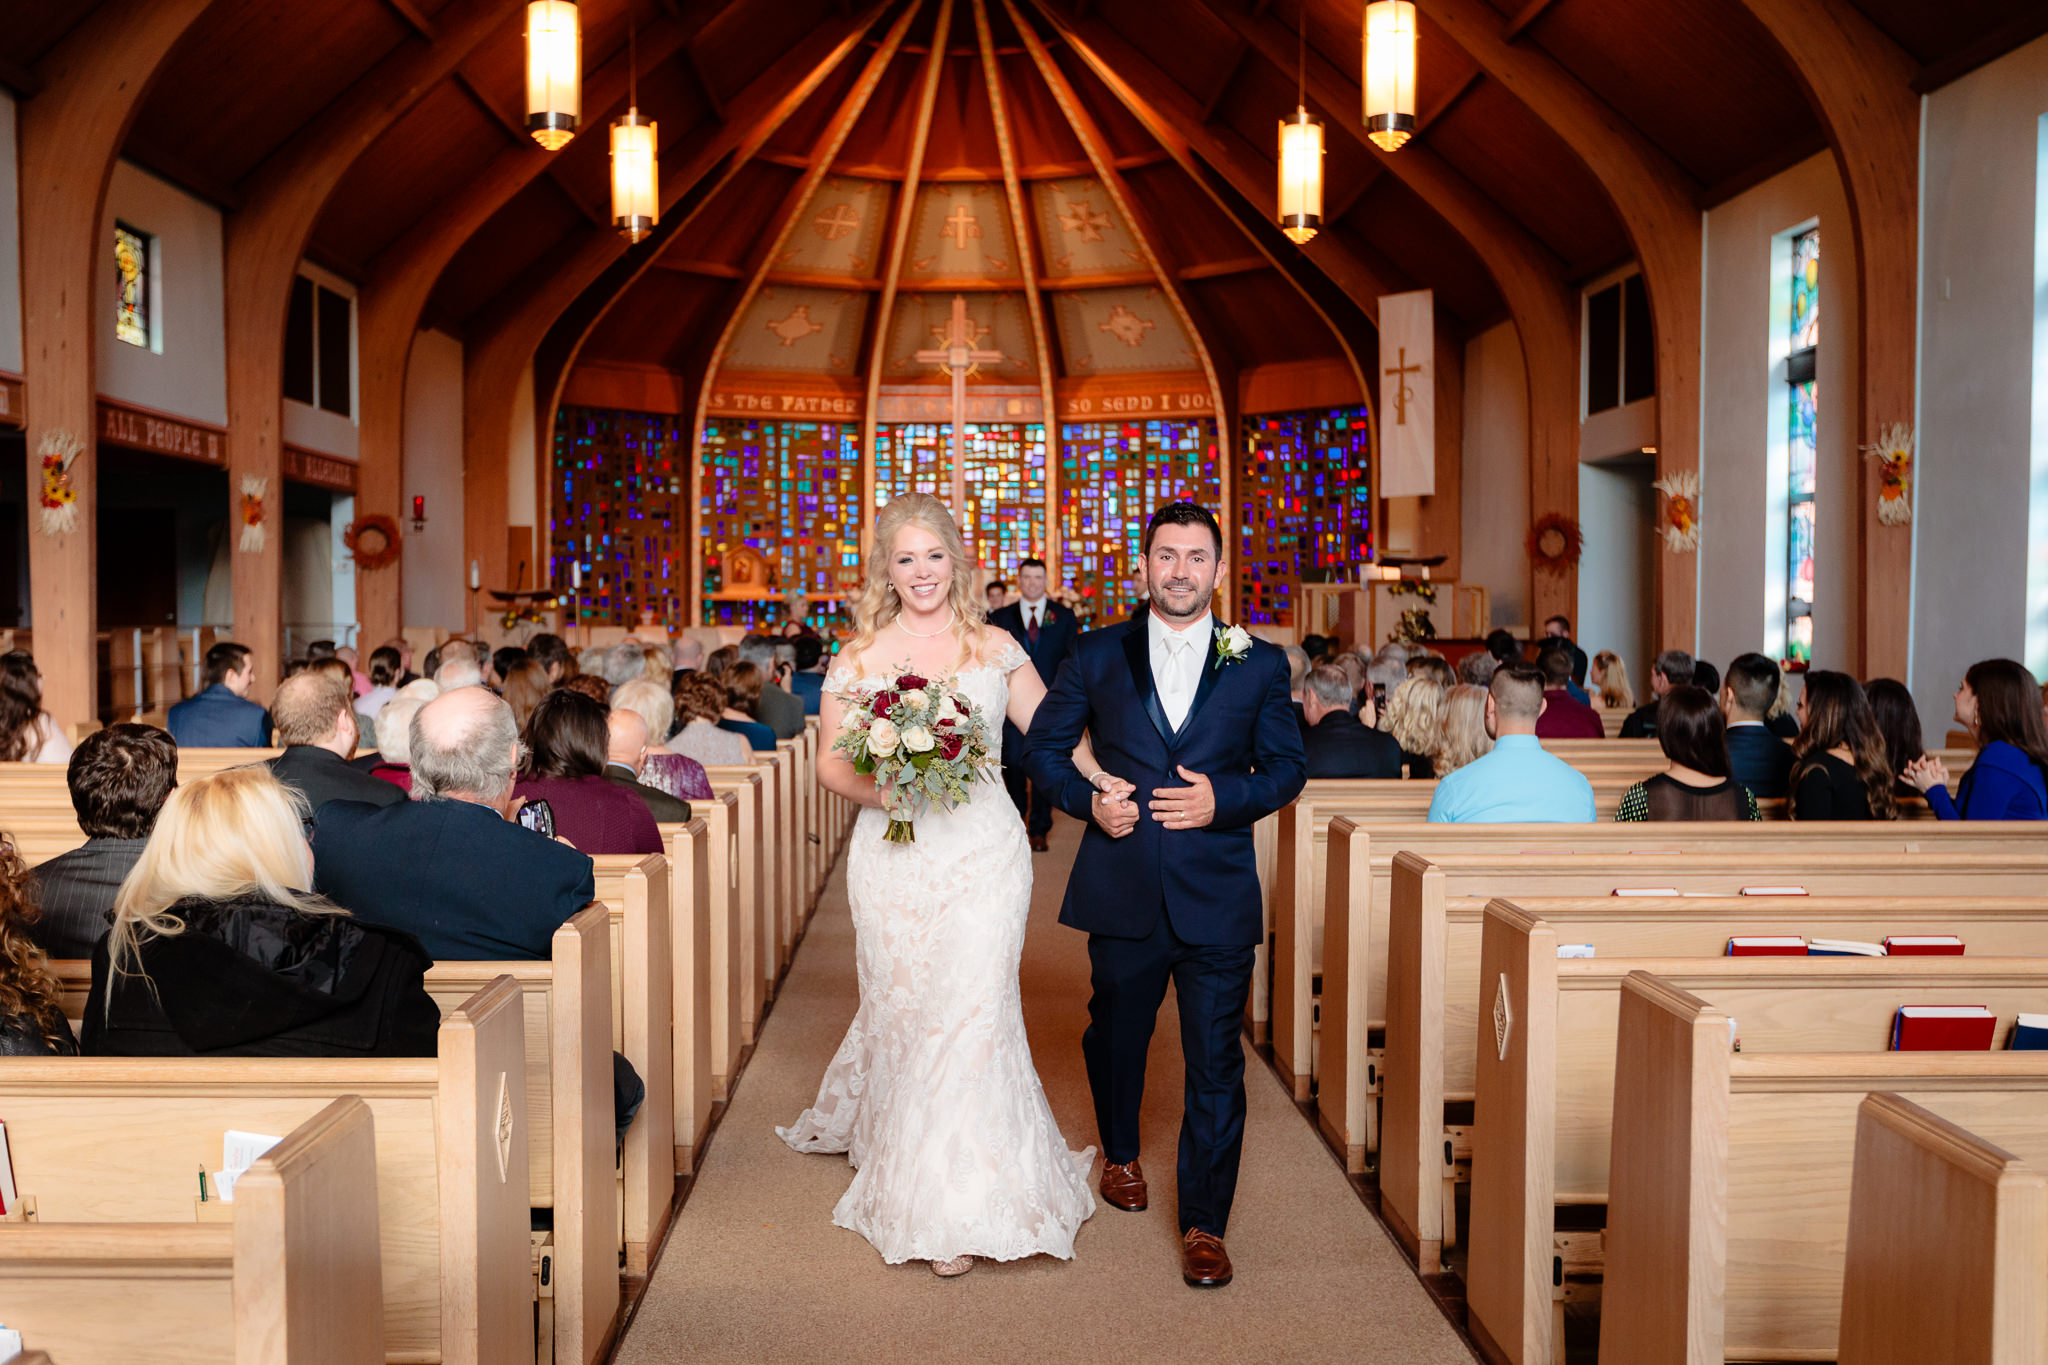 Newlyweds exit their wedding at Zion Lutheran Church in Penn Hills